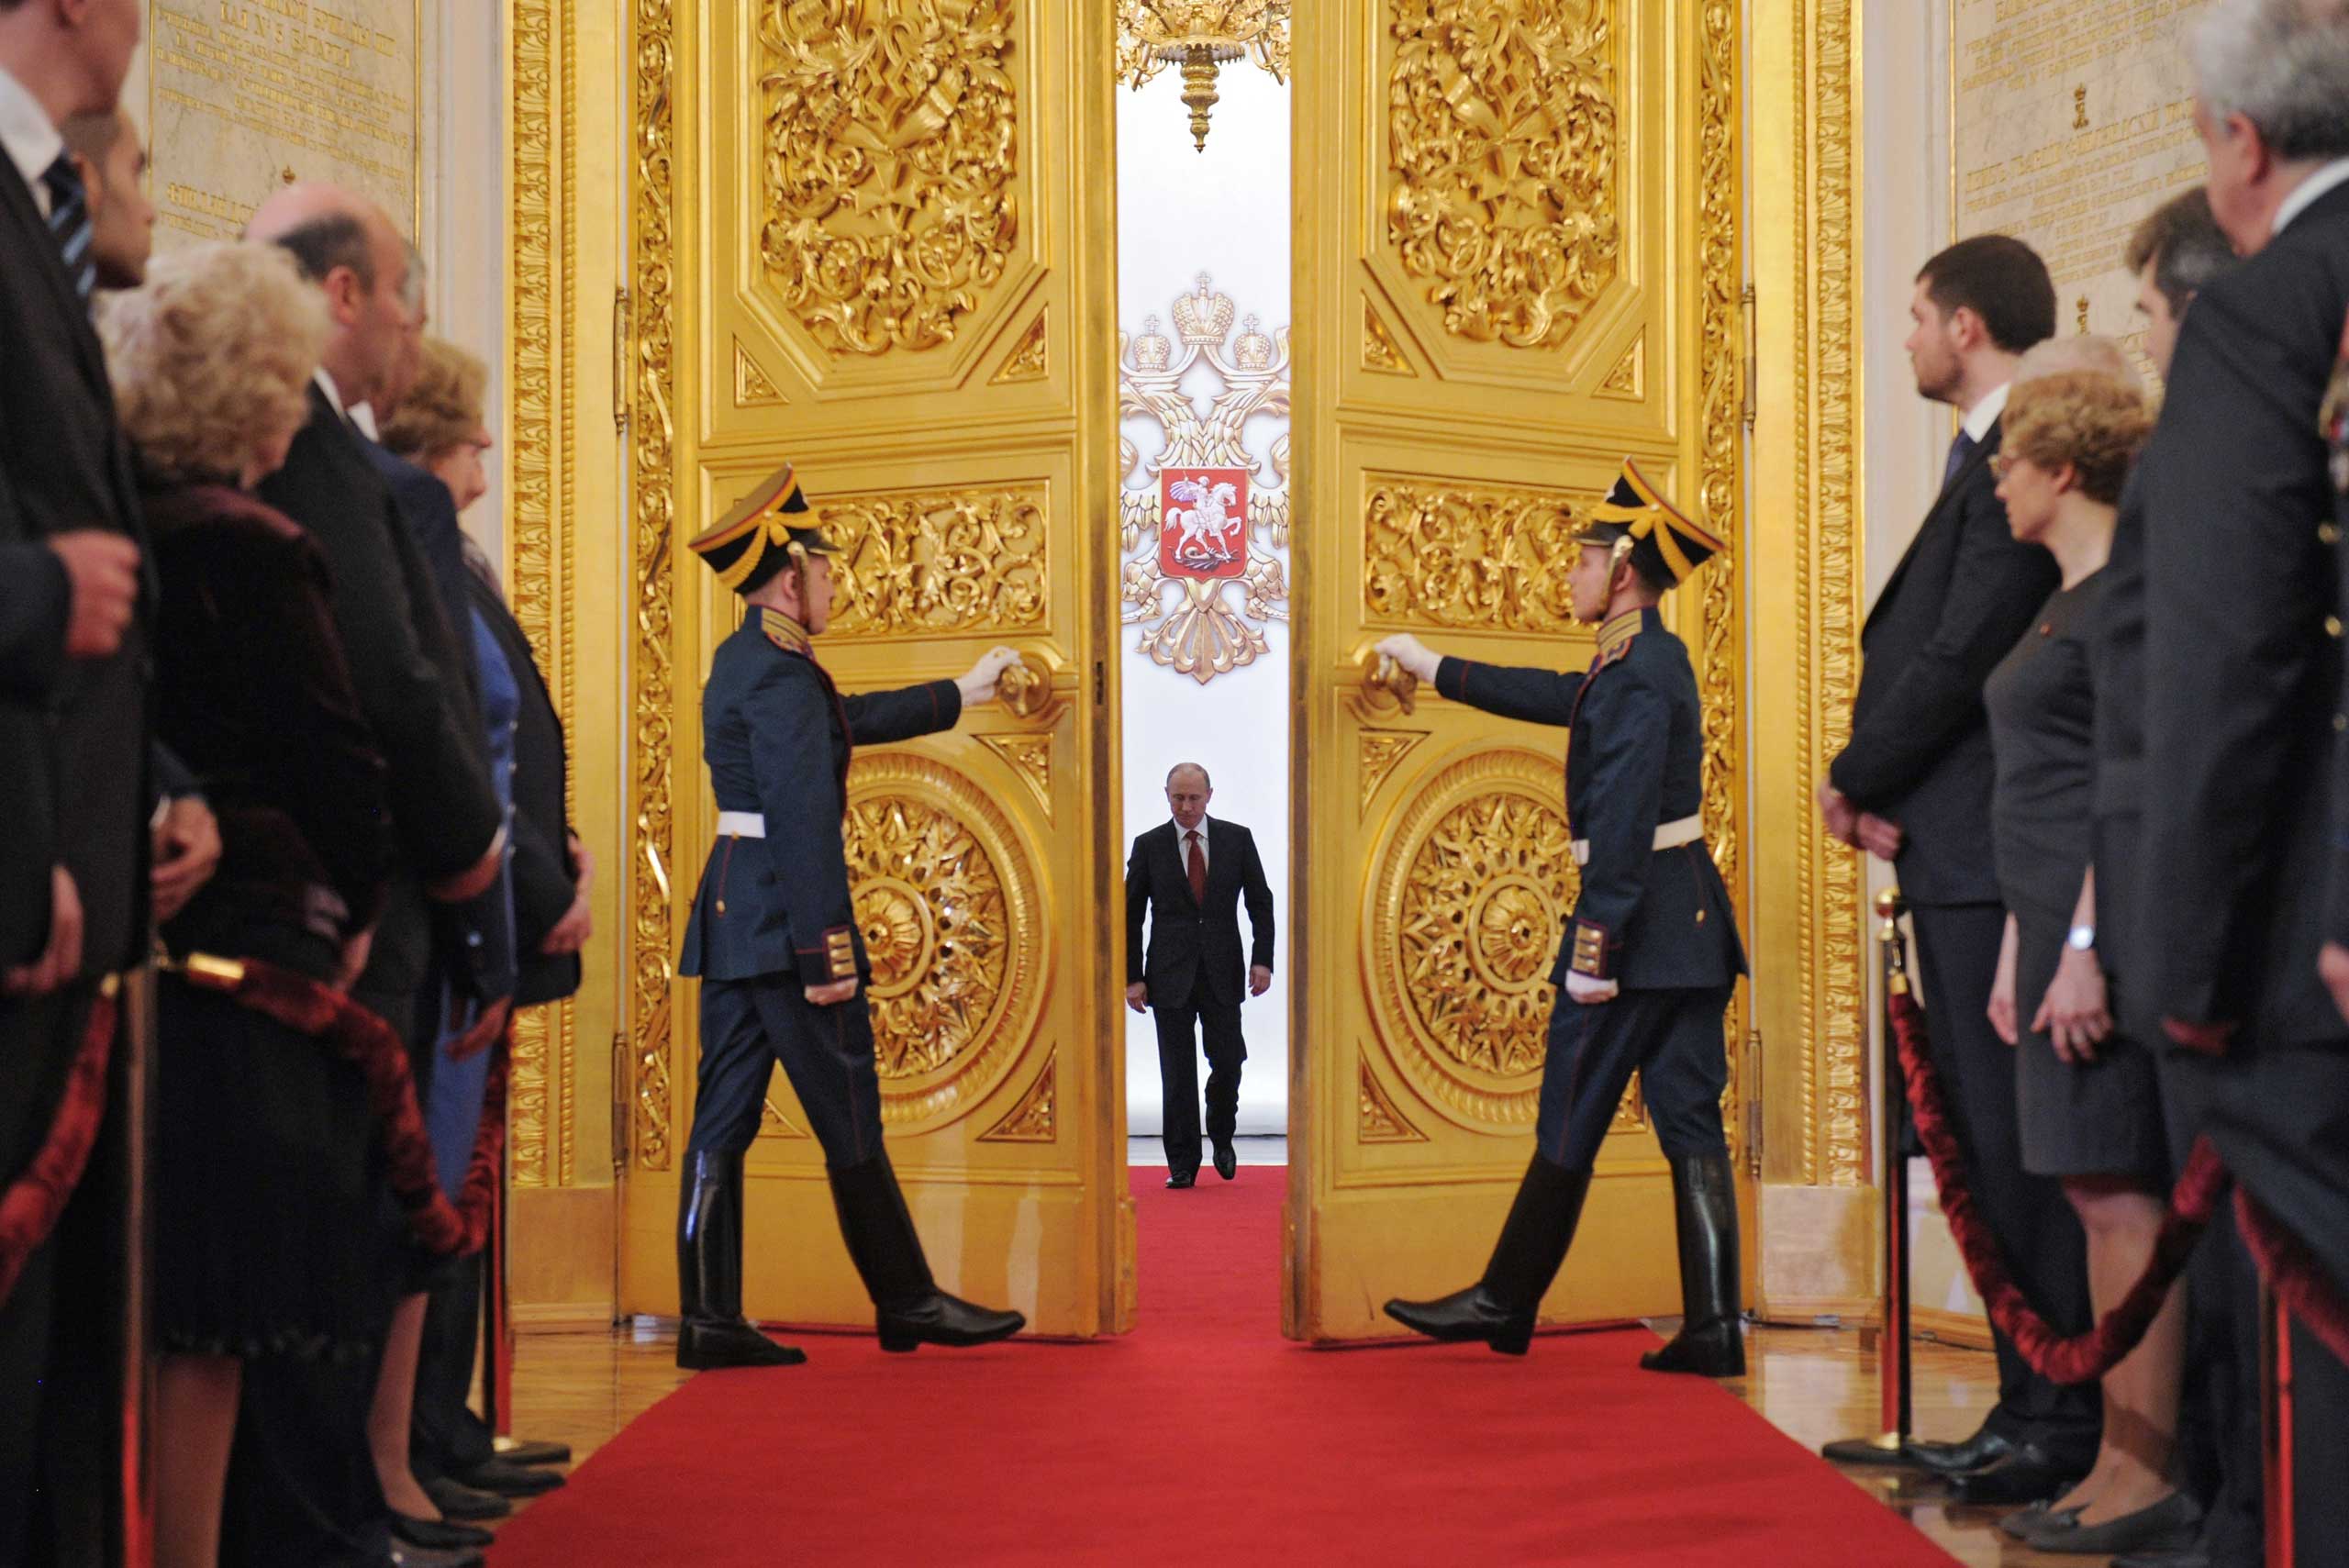 President Putin at the Great Kremlin Palace in Moscow on May 7, 2012, during his inauguration ceremony. (Alexey Druzhinin—AFP/Getty Images)